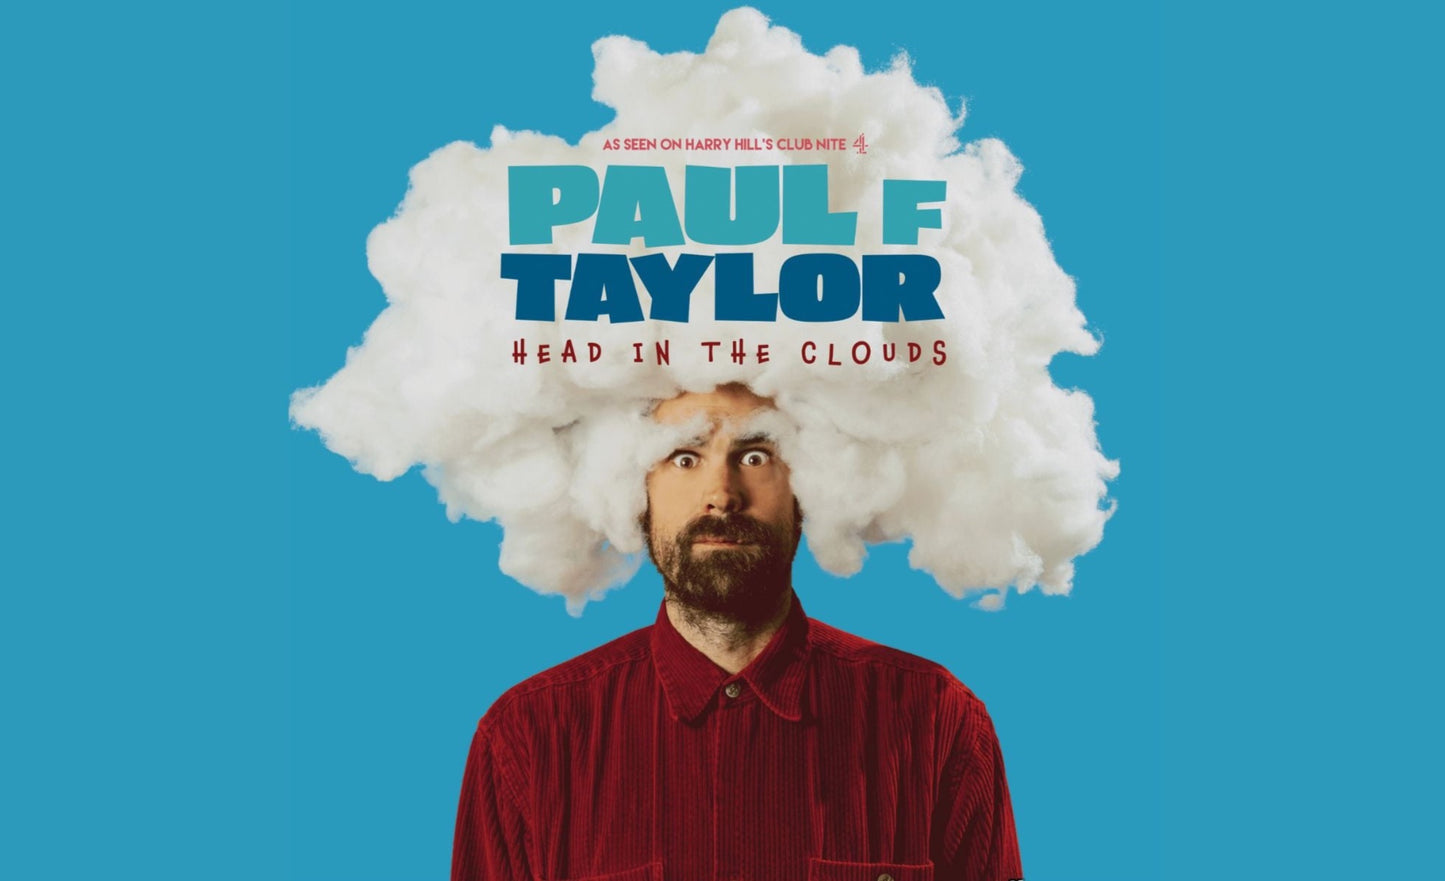 Paul F Taylor brings his brand new comedy show 'Head in the Clouds' to the Attic Southampton